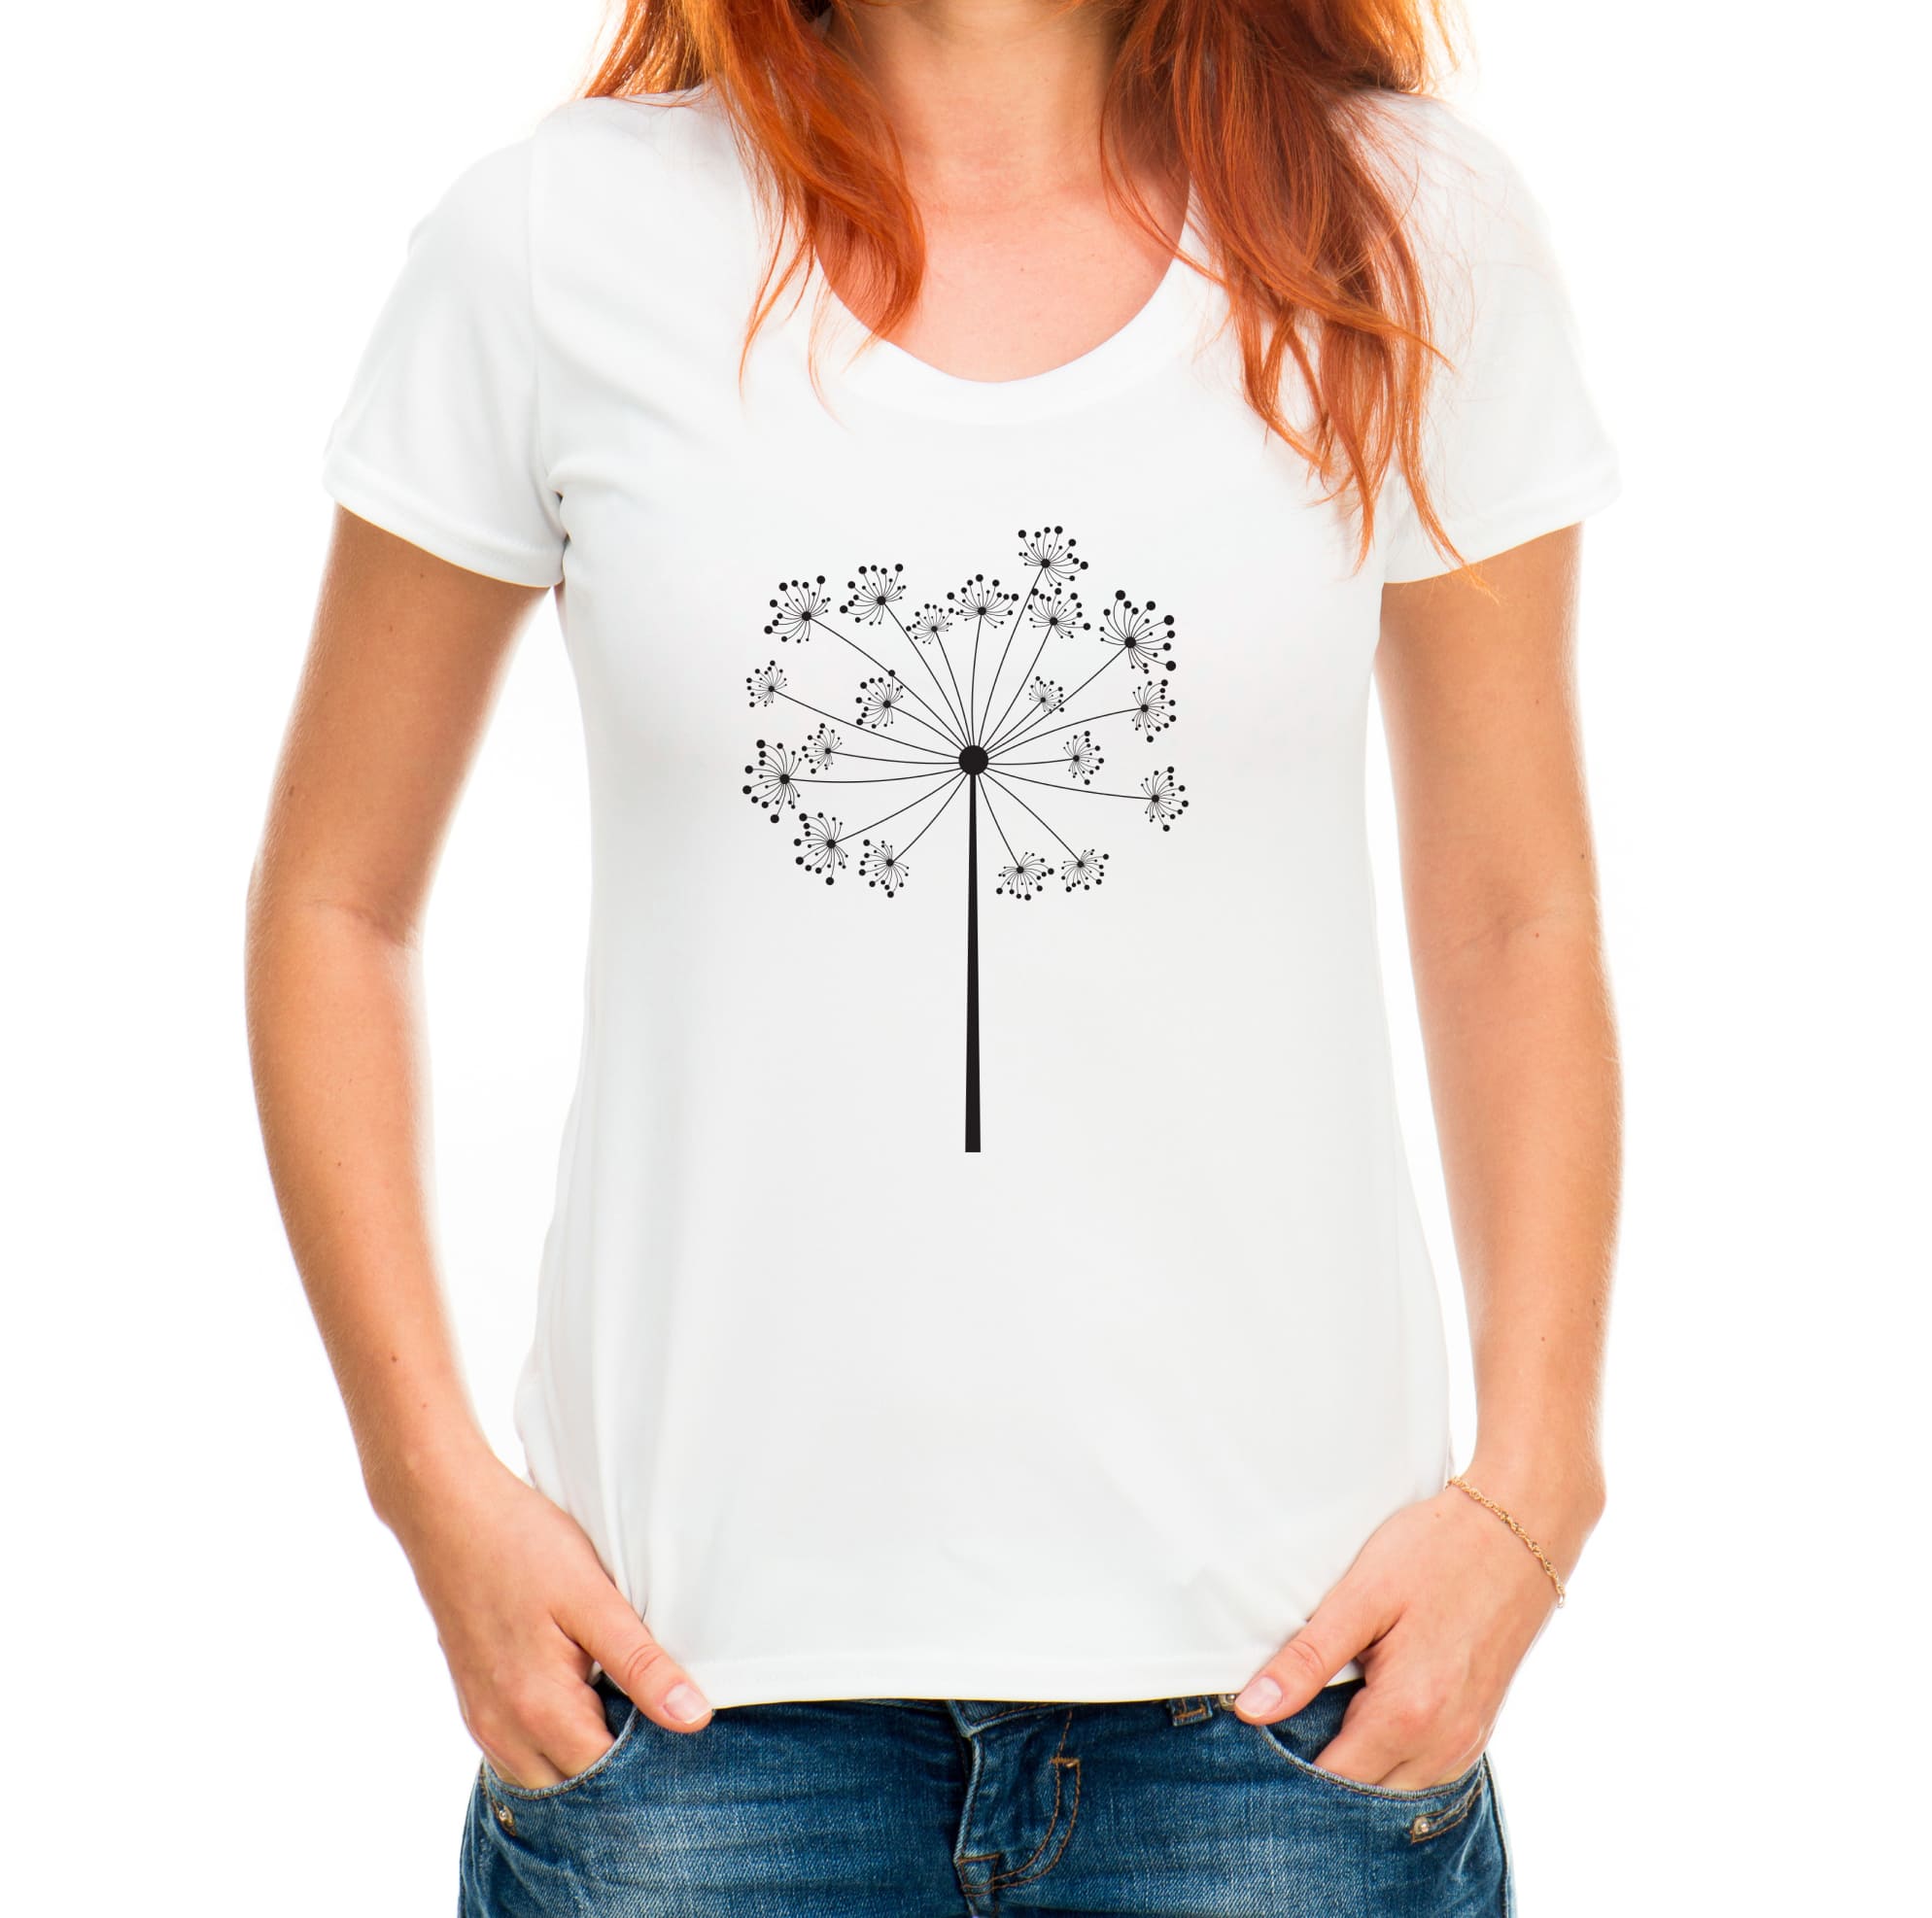 Image of a t-shirt with an elegant dandelion print.